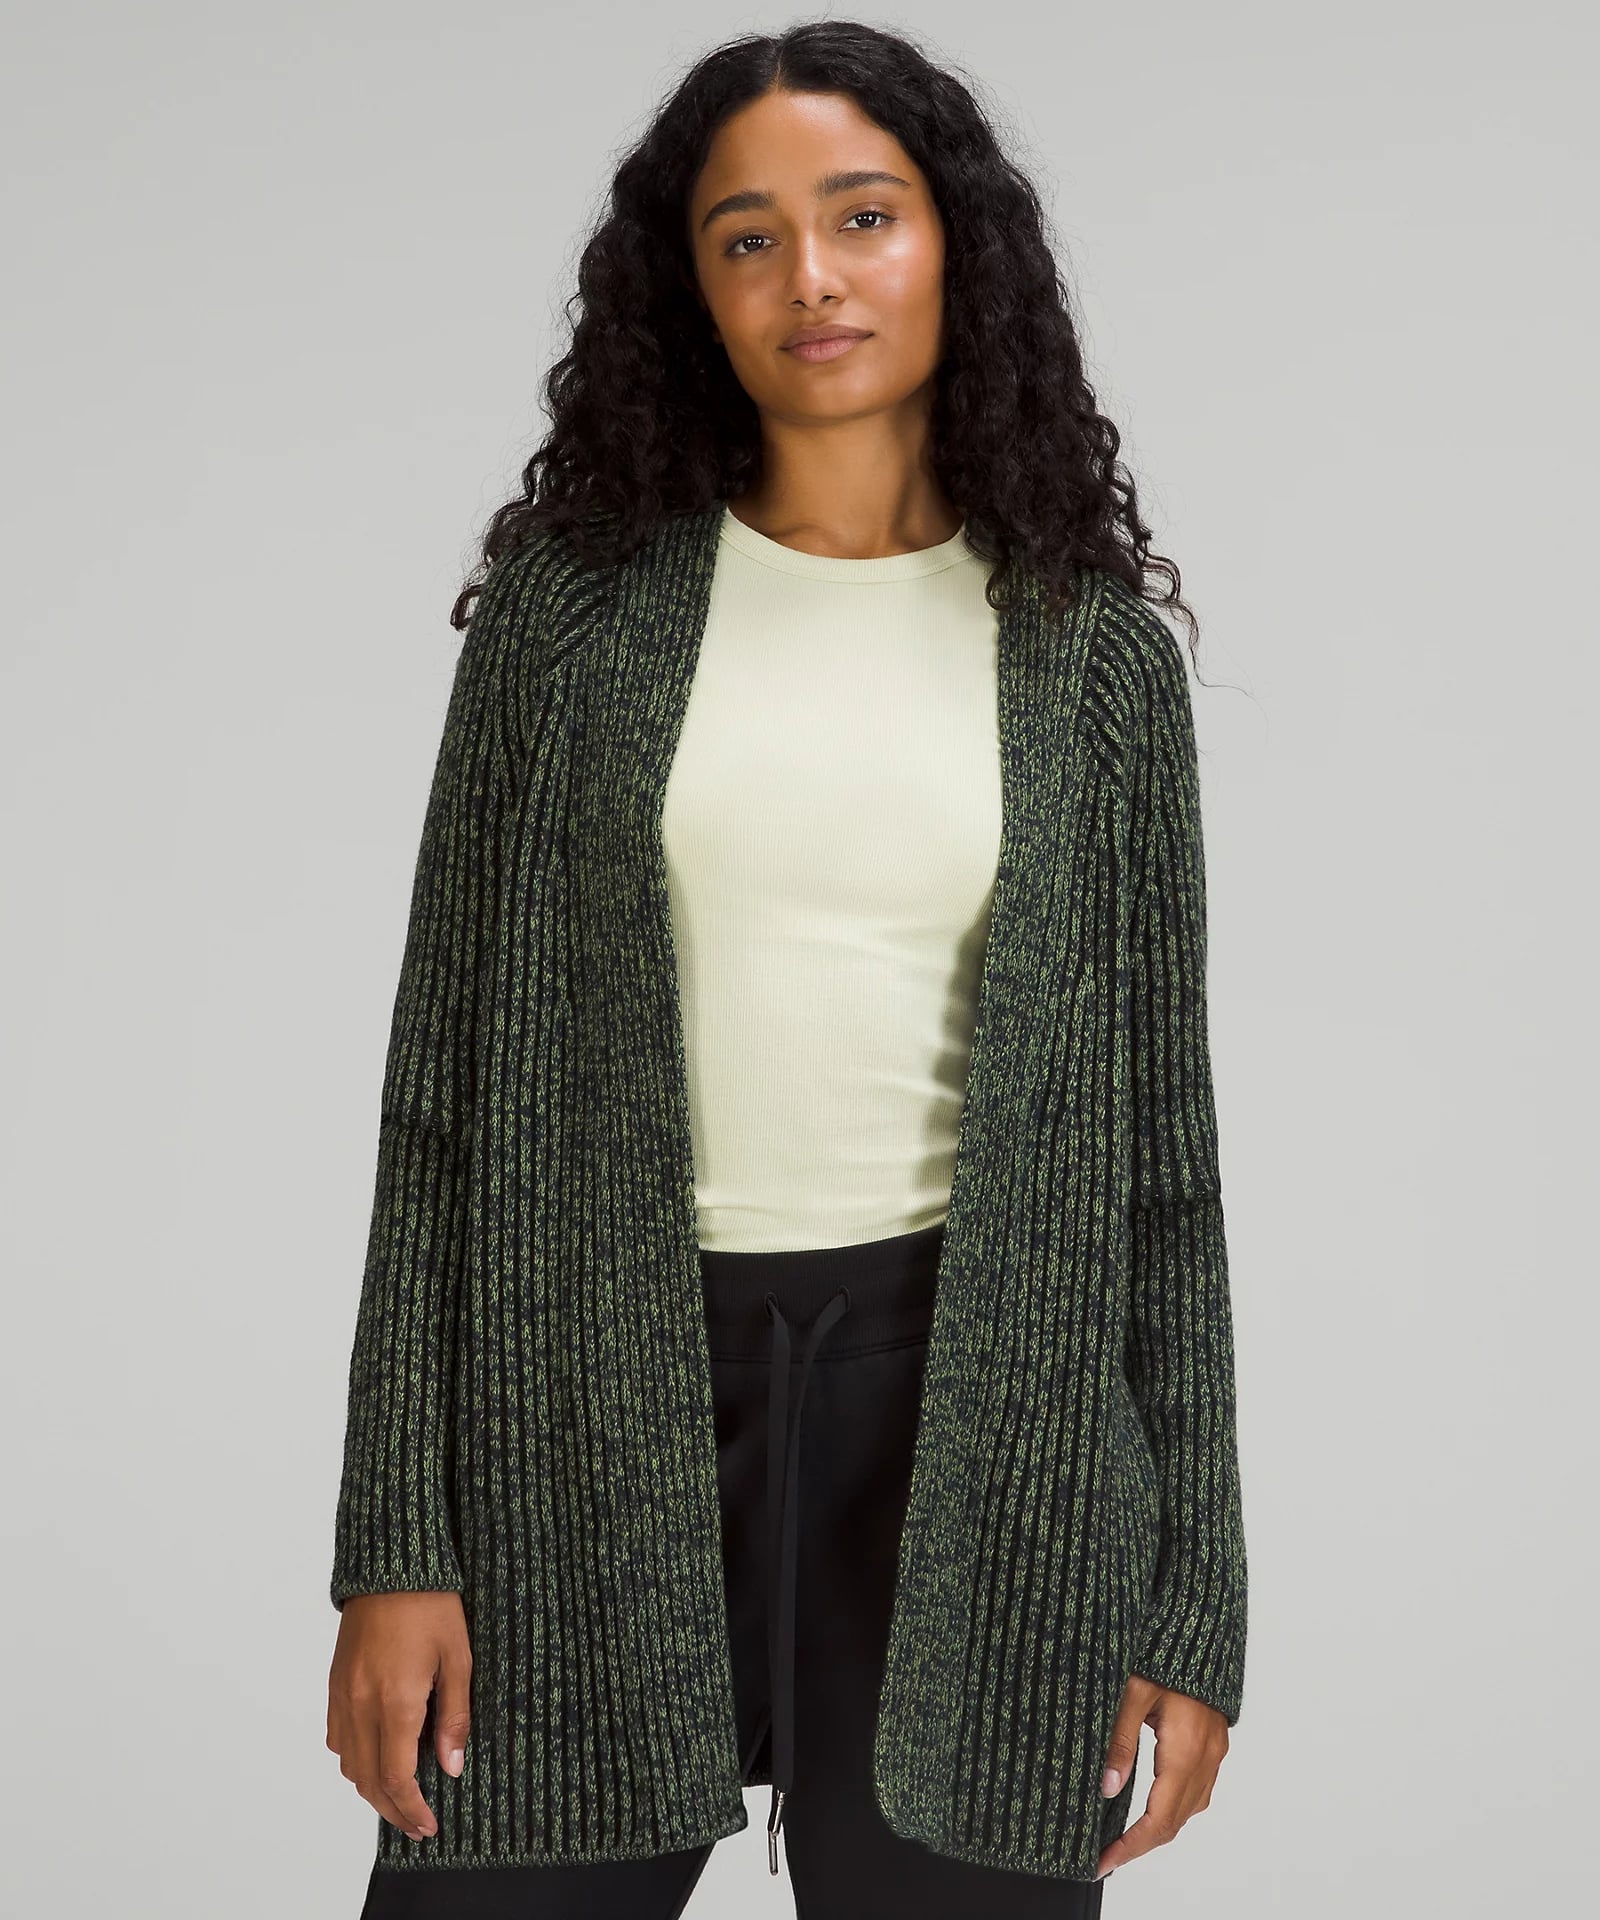 15 best cardigans for women in every style and budget